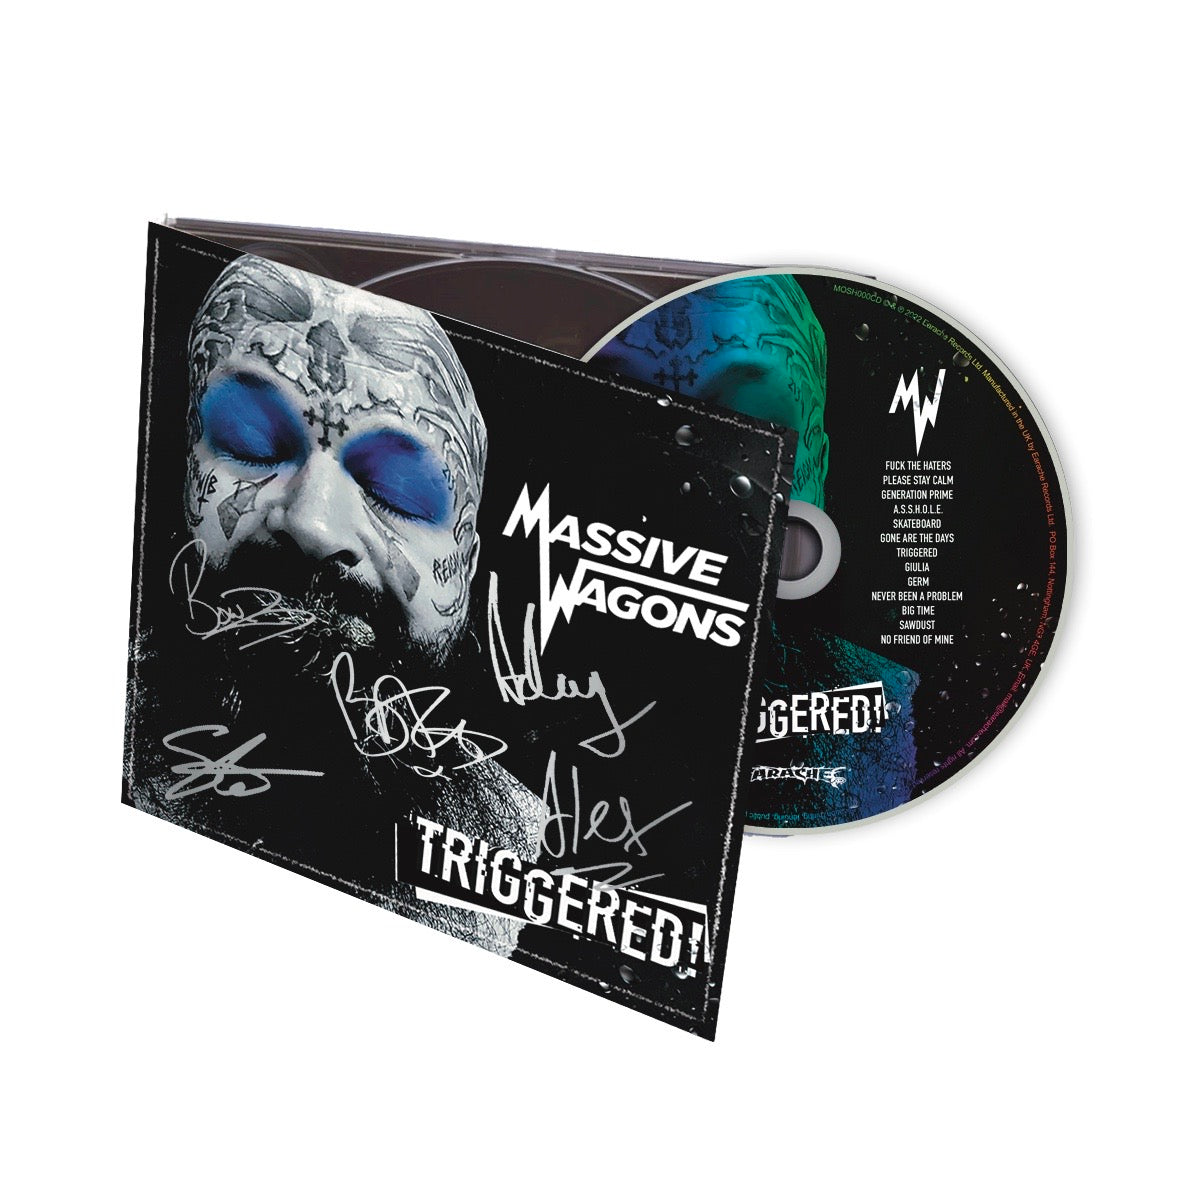 Massive Wagons "TRIGGERED!" Signed CD w/ 12 Page Booklet